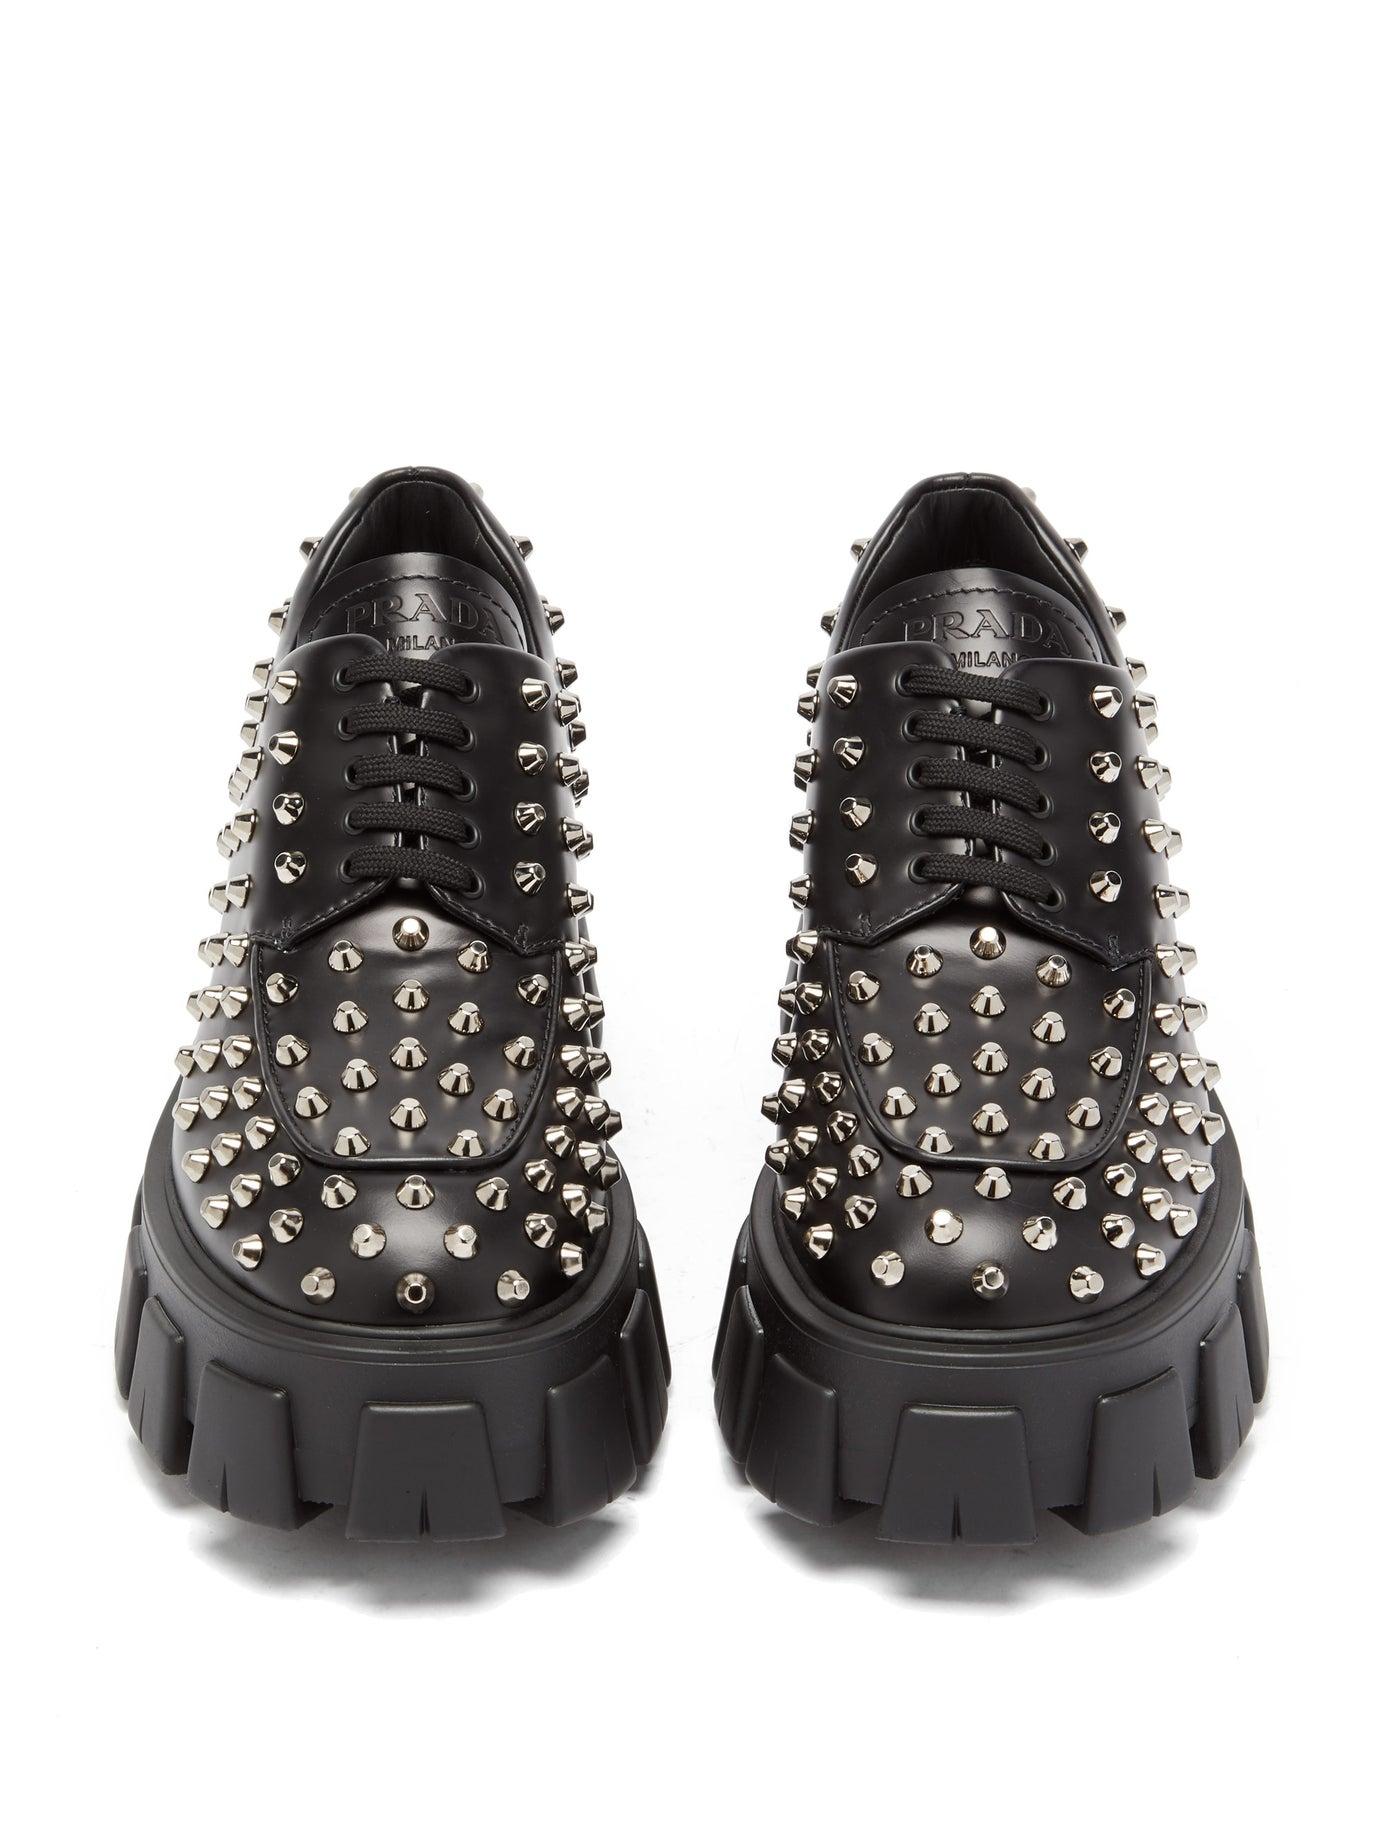 Prada Studded Leather Derby Shoes in Nero (Black) - Lyst